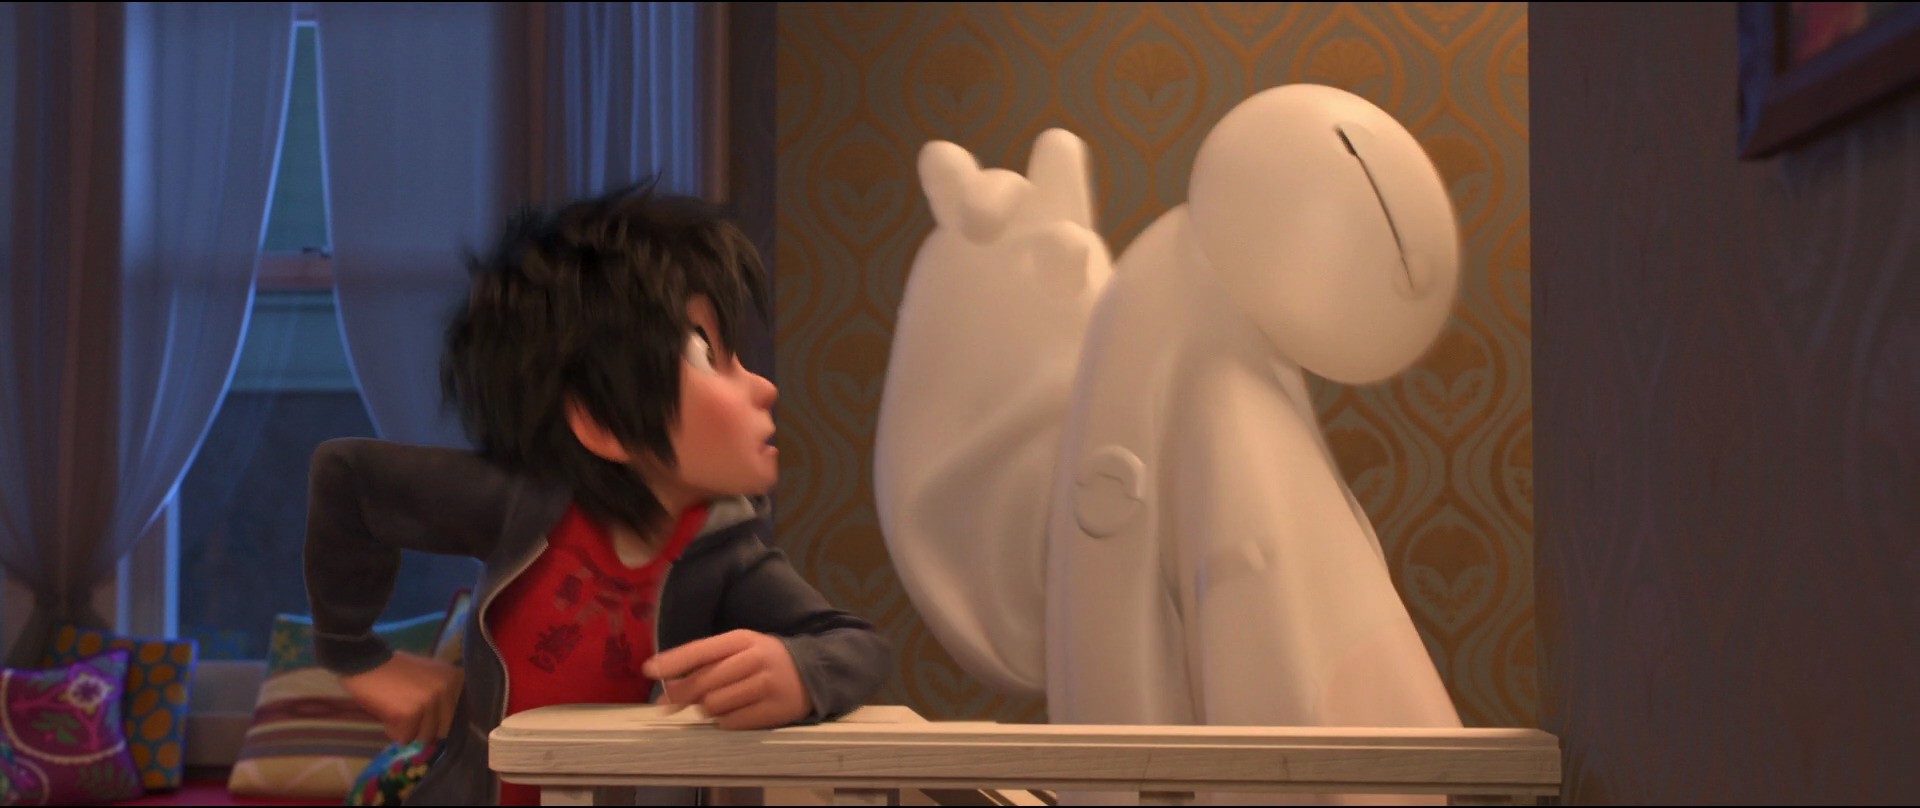 Melted Baymax? 